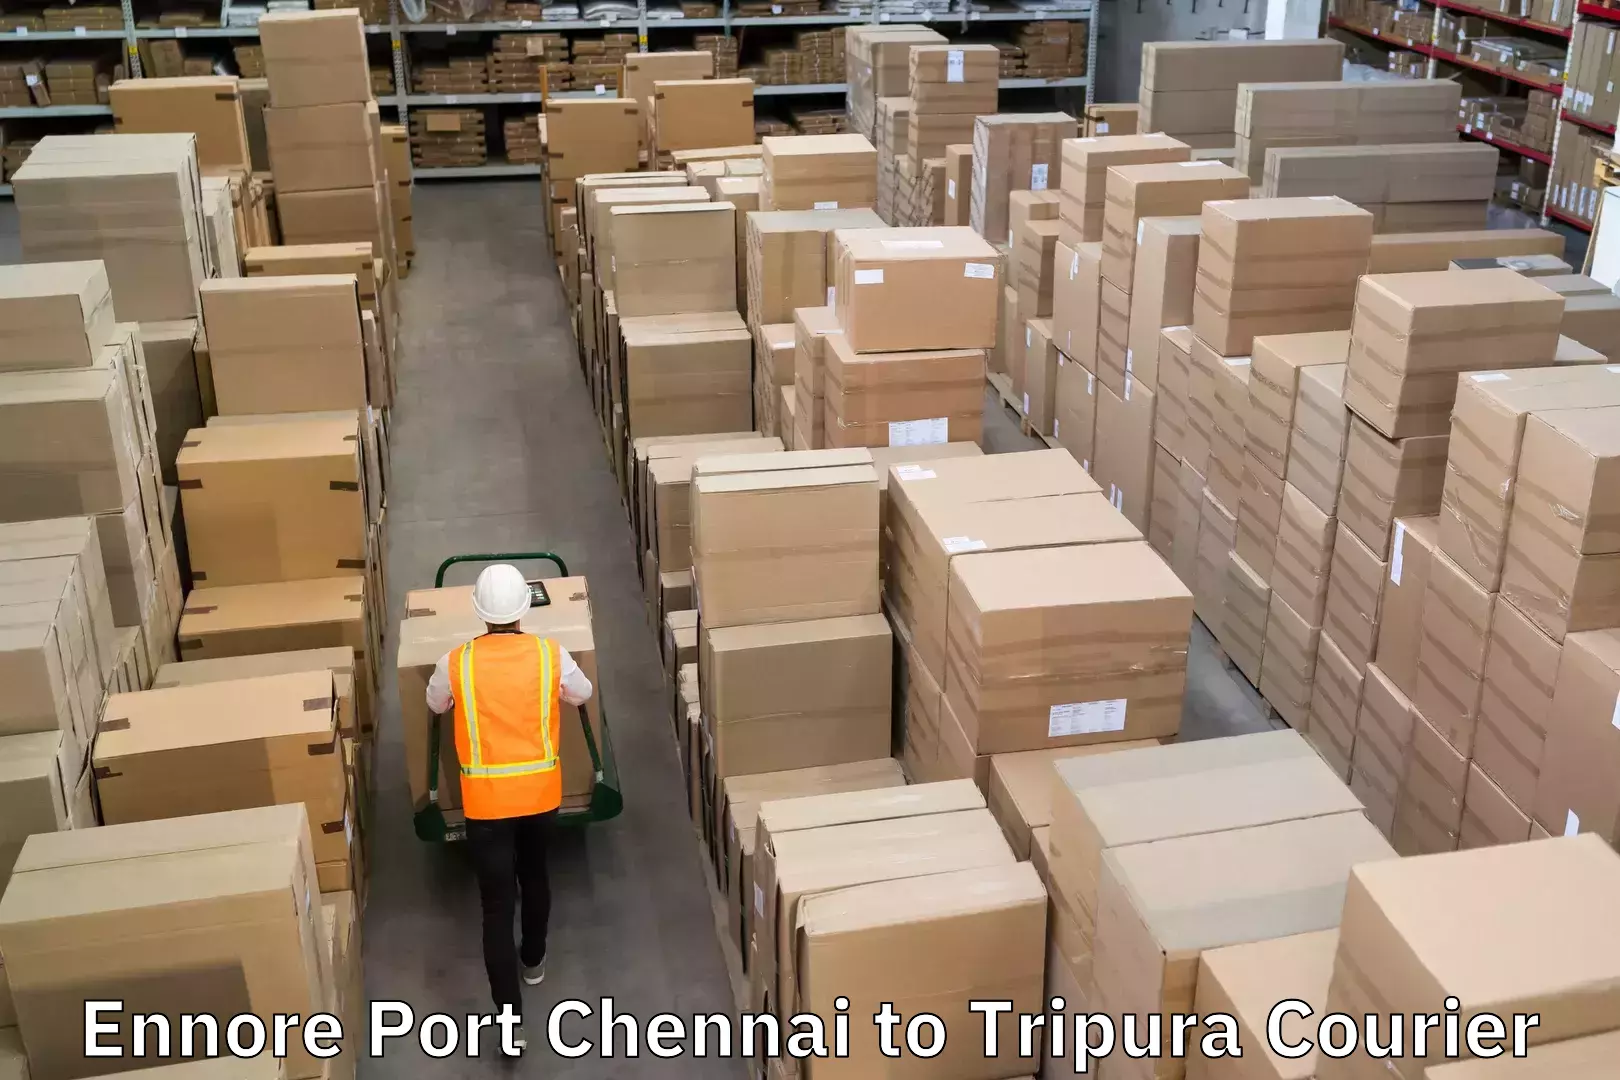 Doorstep delivery service Ennore Port Chennai to Tripura